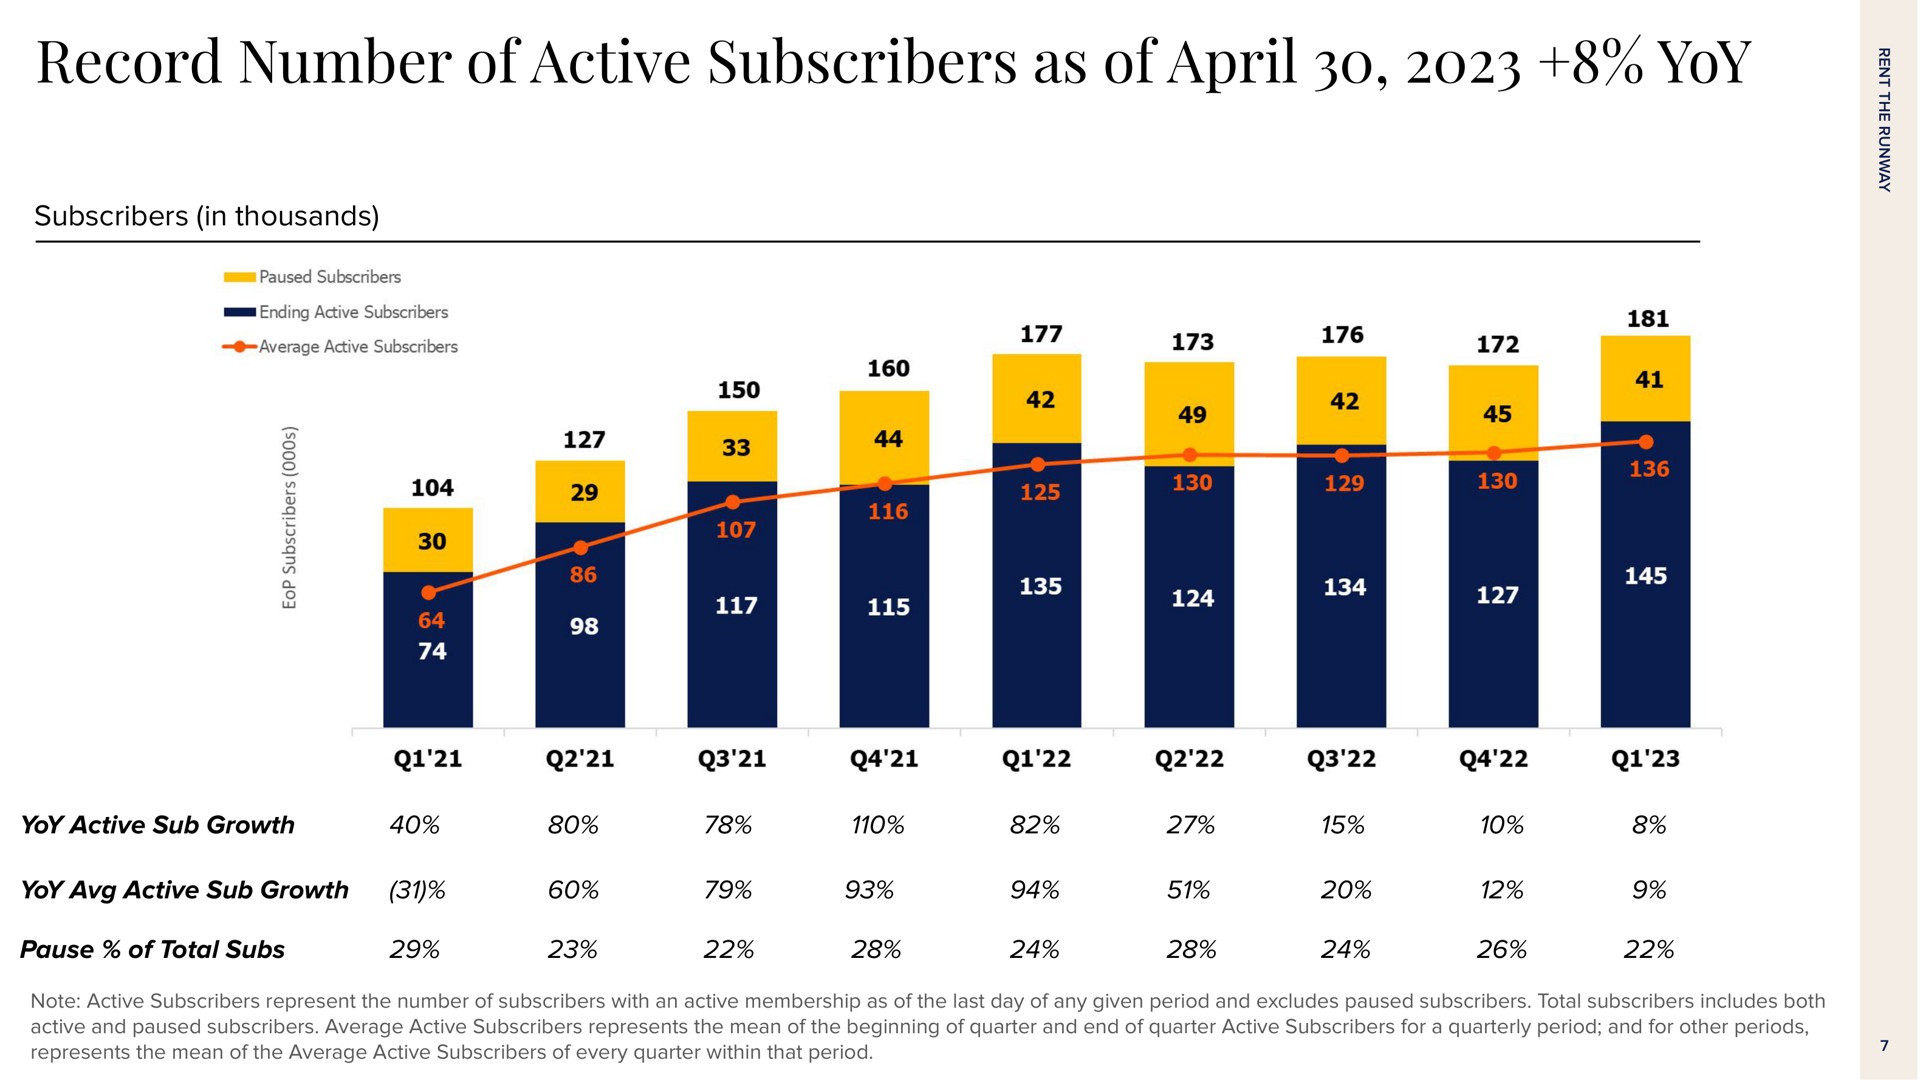 record number of active subscribers as of yoy | Rent The Runway